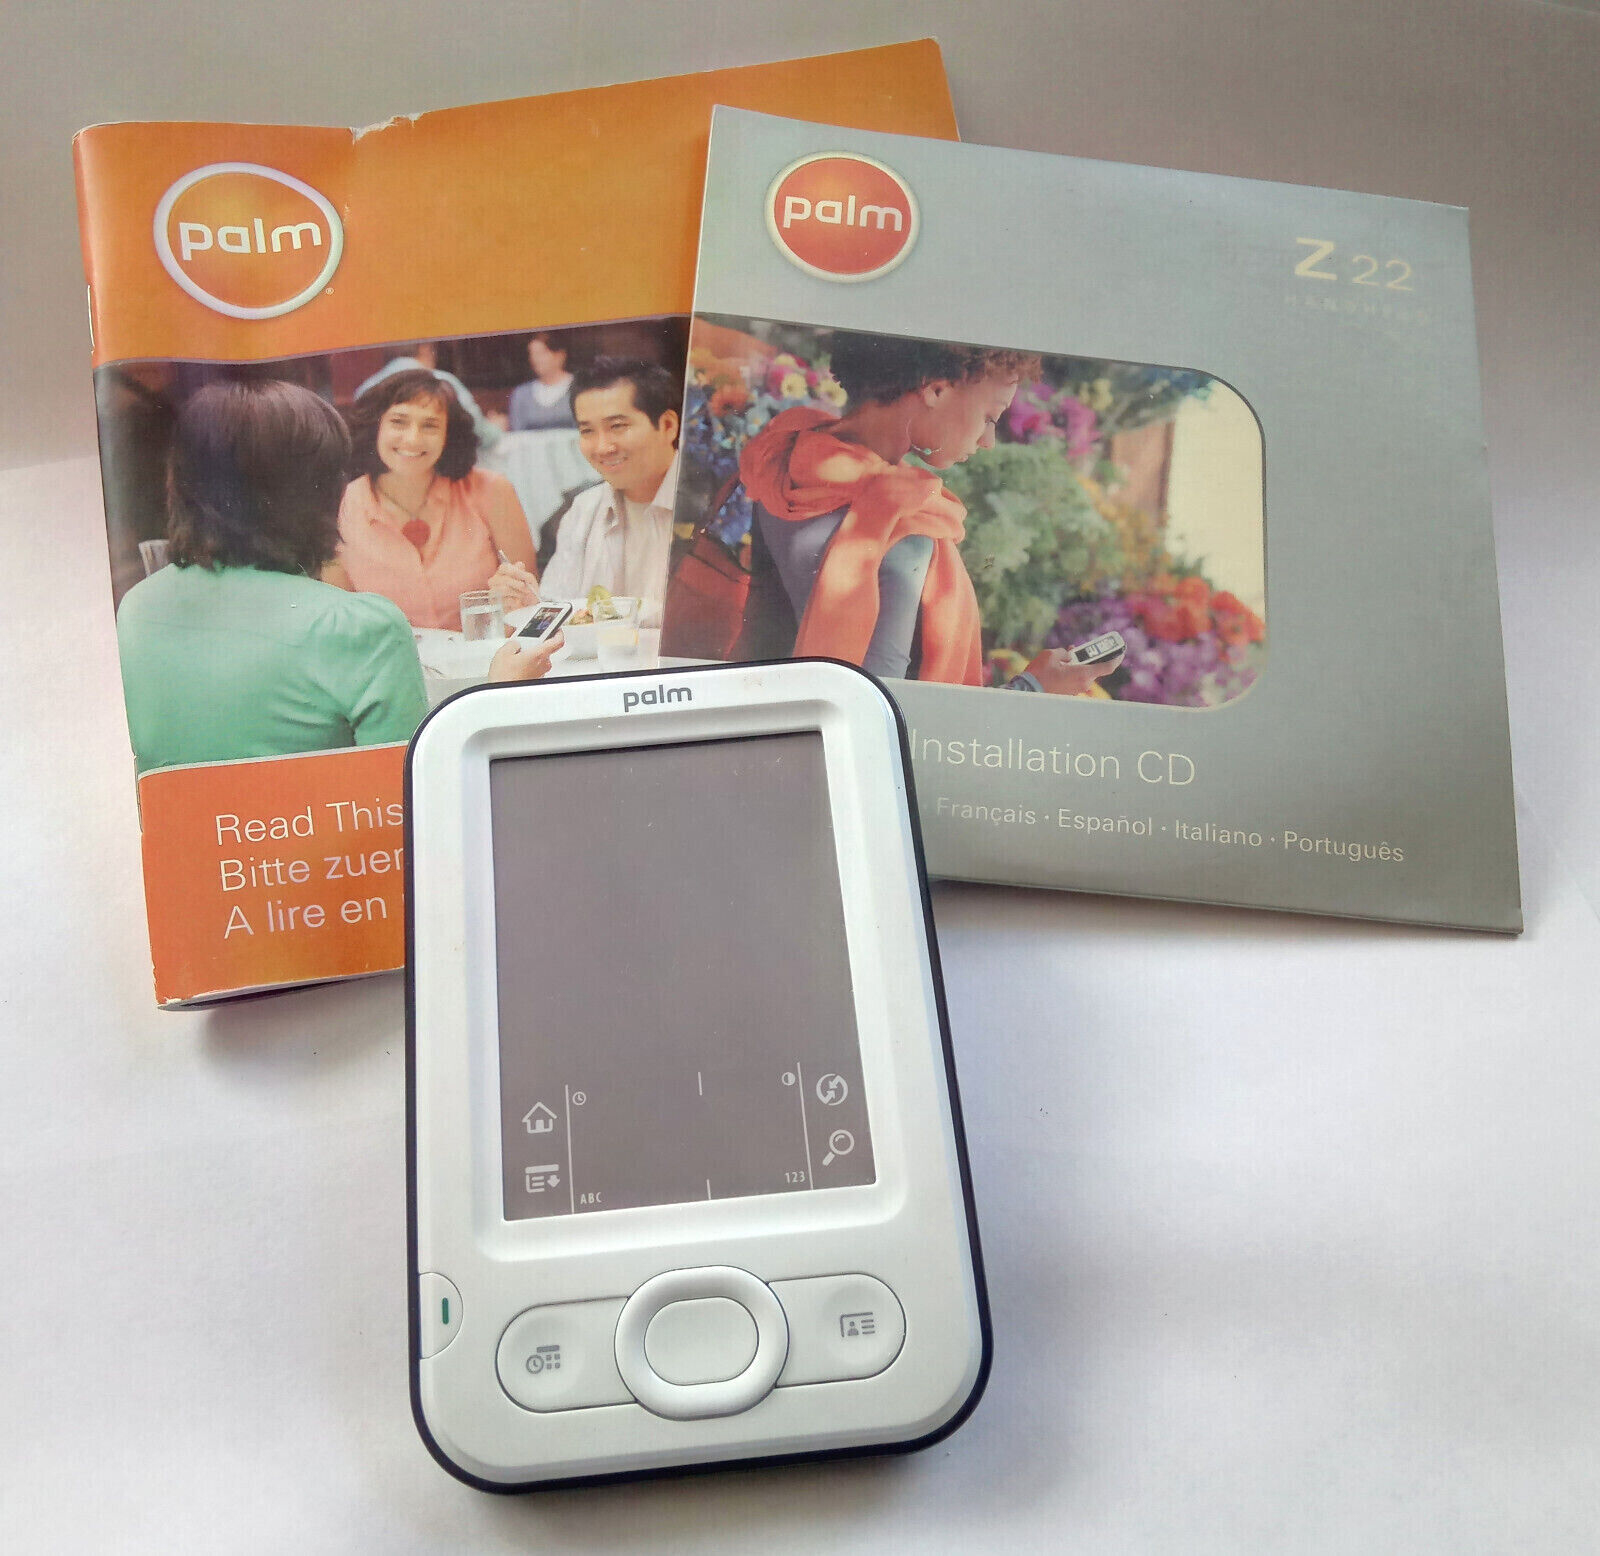 Palm Z22 Handheld Color Pda With Instruction Manual & Installation Cd